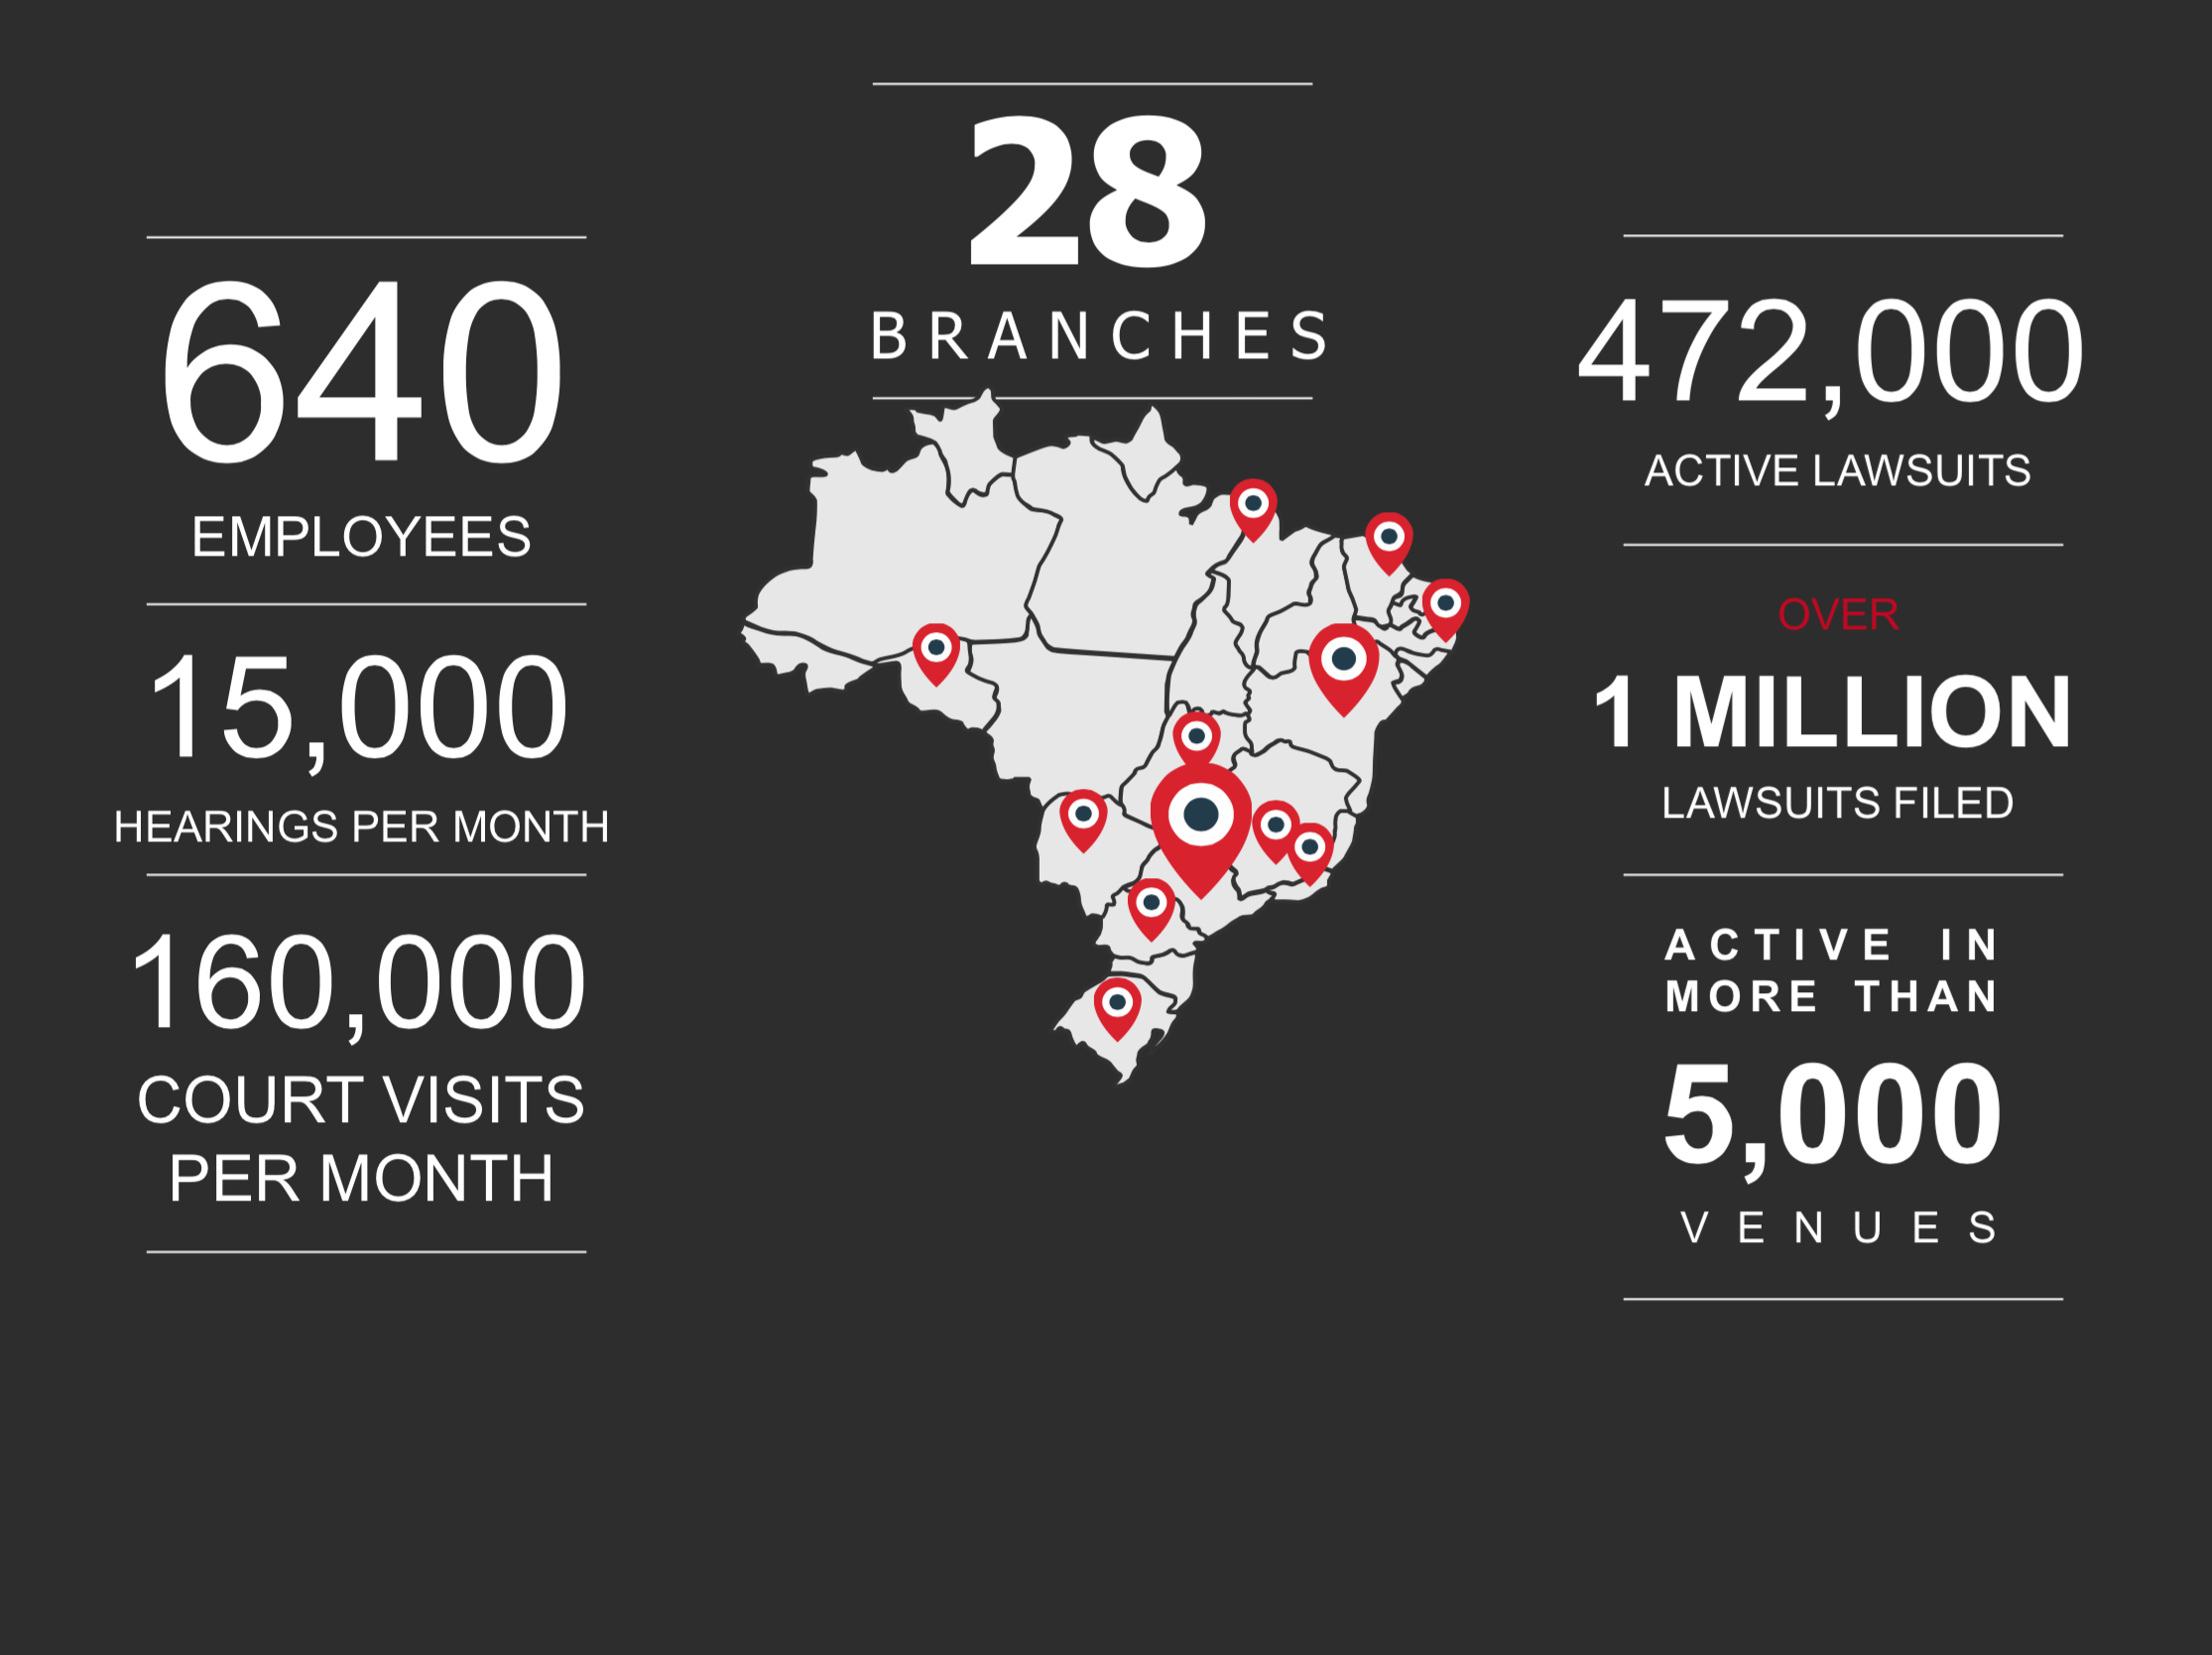 Statistics on Finch Solutions a technology provider to JBM, Mandaliti, and other Brazilian law firms and legal departments.